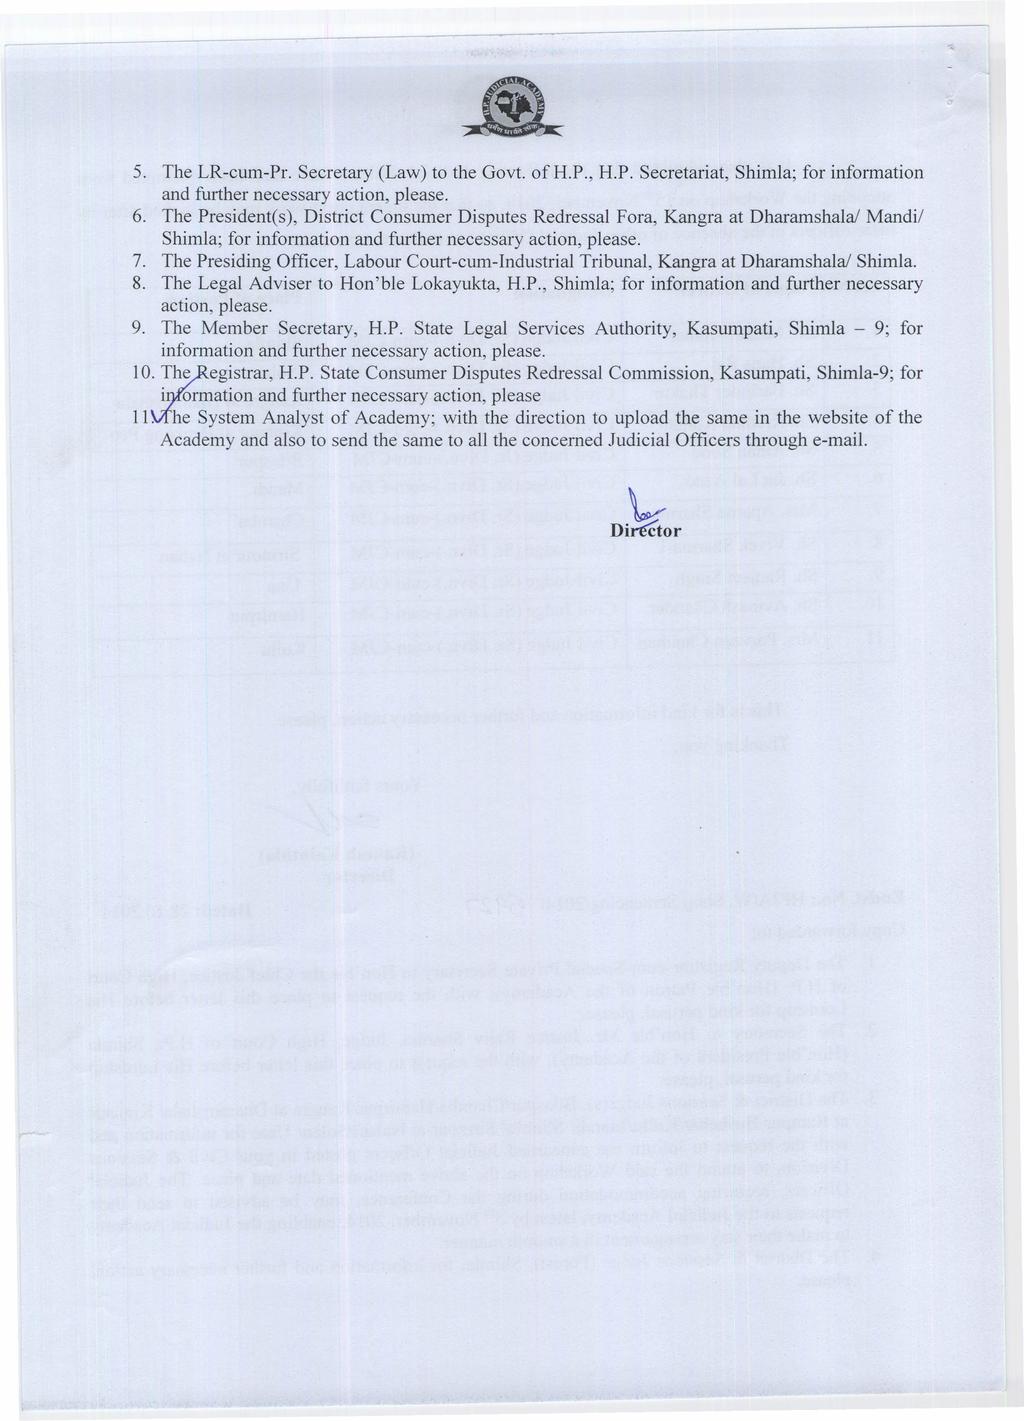 5. The LR-cum-Pr. Secretary (Law) to the Govt. ofh.p., H.P. Secretariat, Shimla; for information and further necessary action, please. 6.